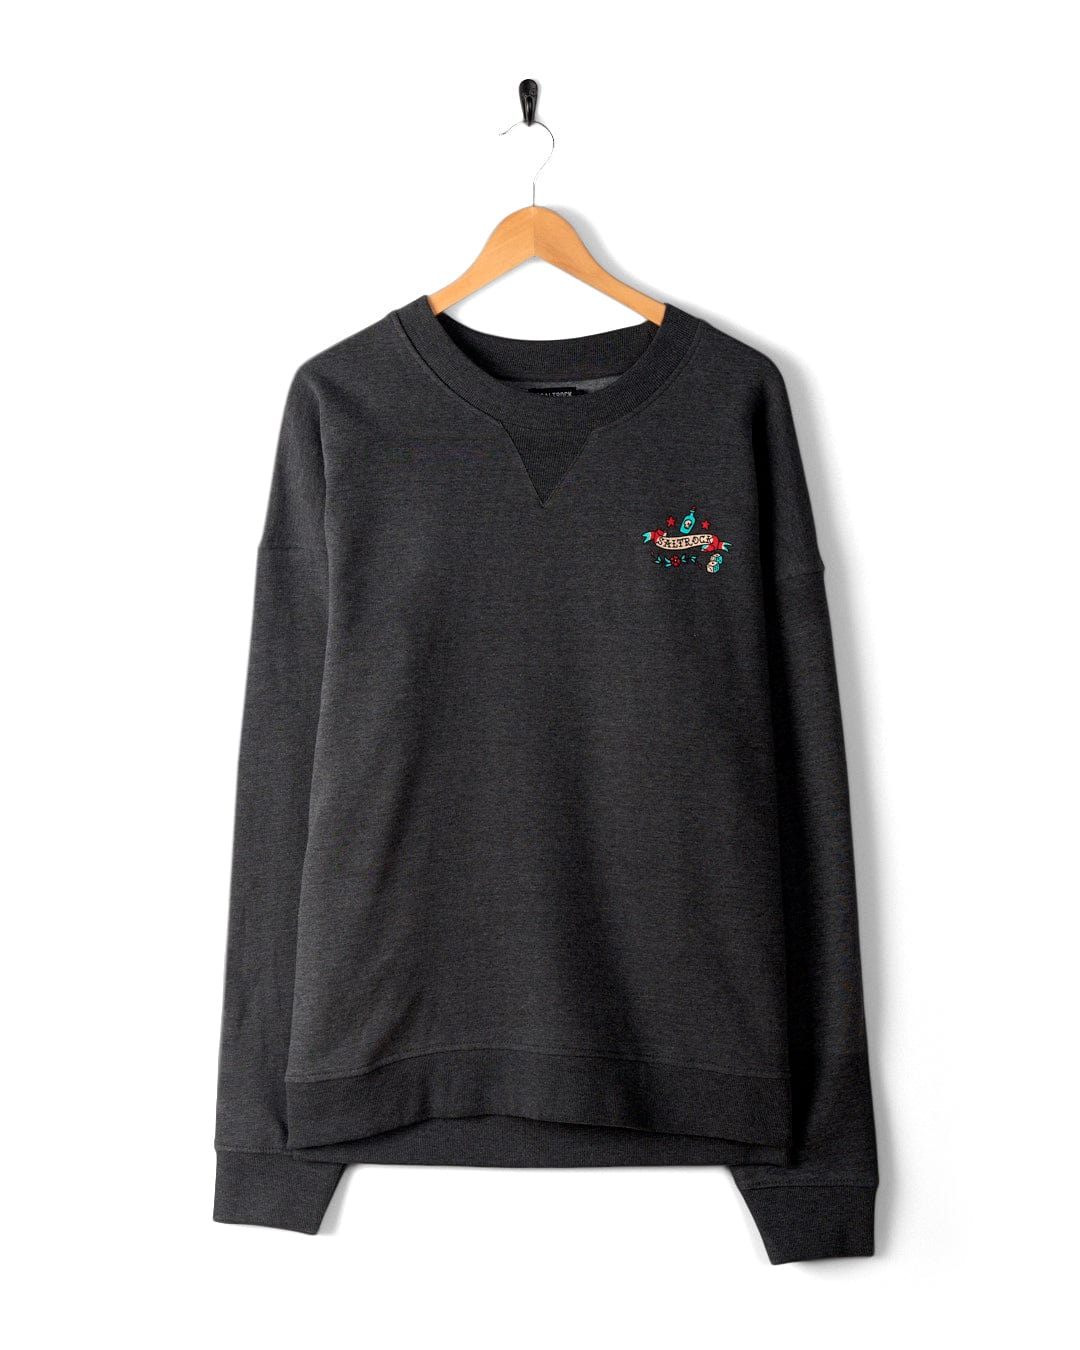 A dark grey Sea Siren - Mens Sweat - Dark Grey with an oversized fit, featuring a small embroidered colorful design on the upper left chest and subtle Saltrock branding, hanging on a wooden hanger against a white background.